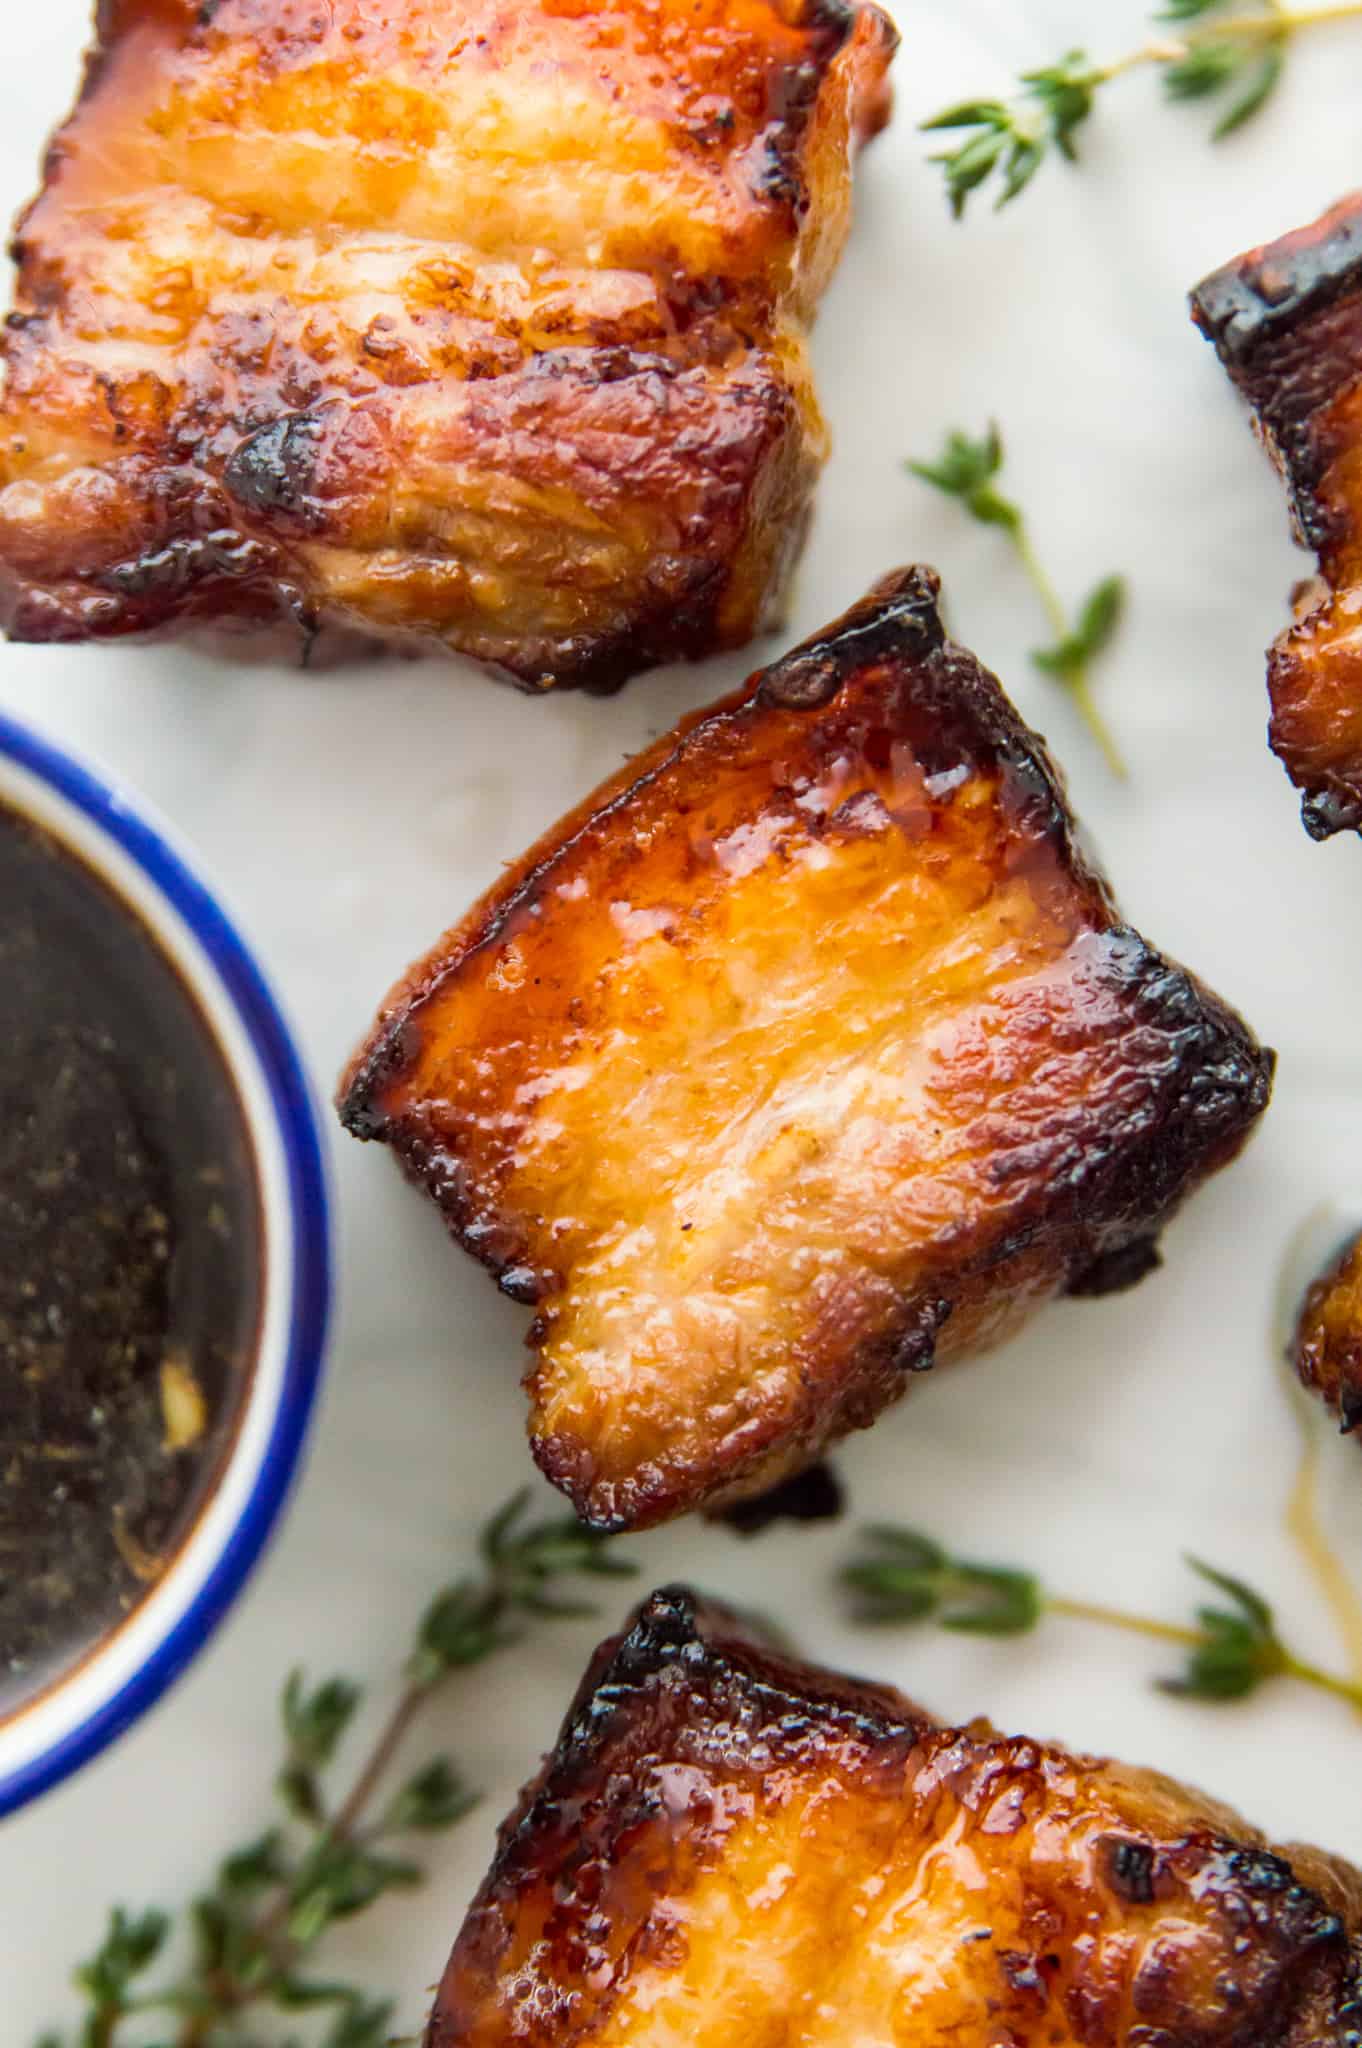 Three pieces of cooked pork belly on a plate with fresh thyme around them.